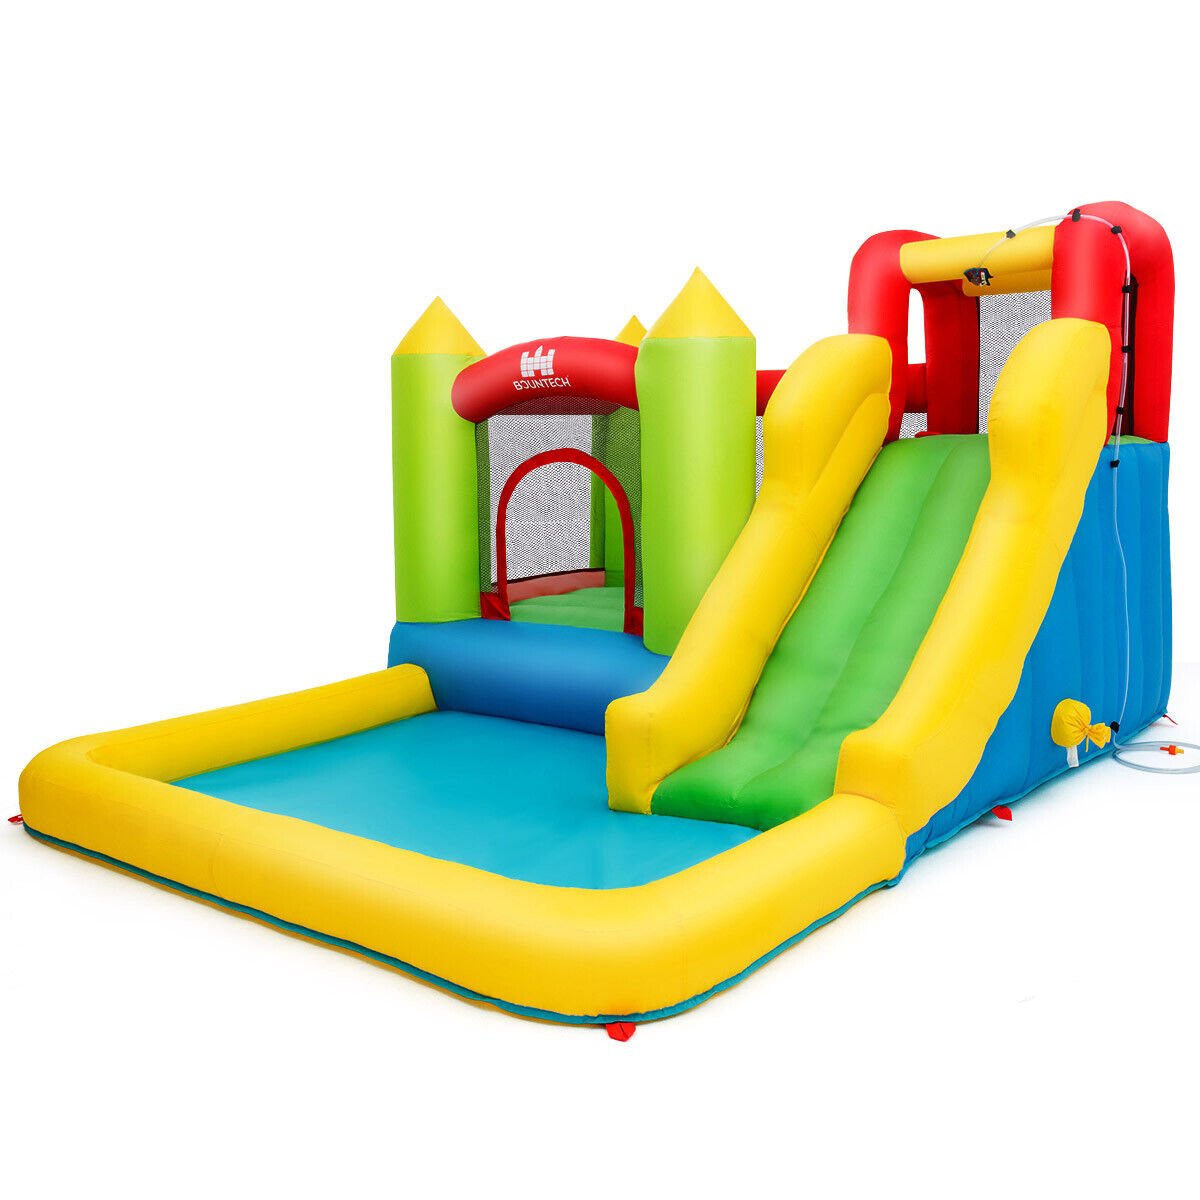 Inflatable Castle with Splash Pool - Water Slide Adventure (Blower Not Included)